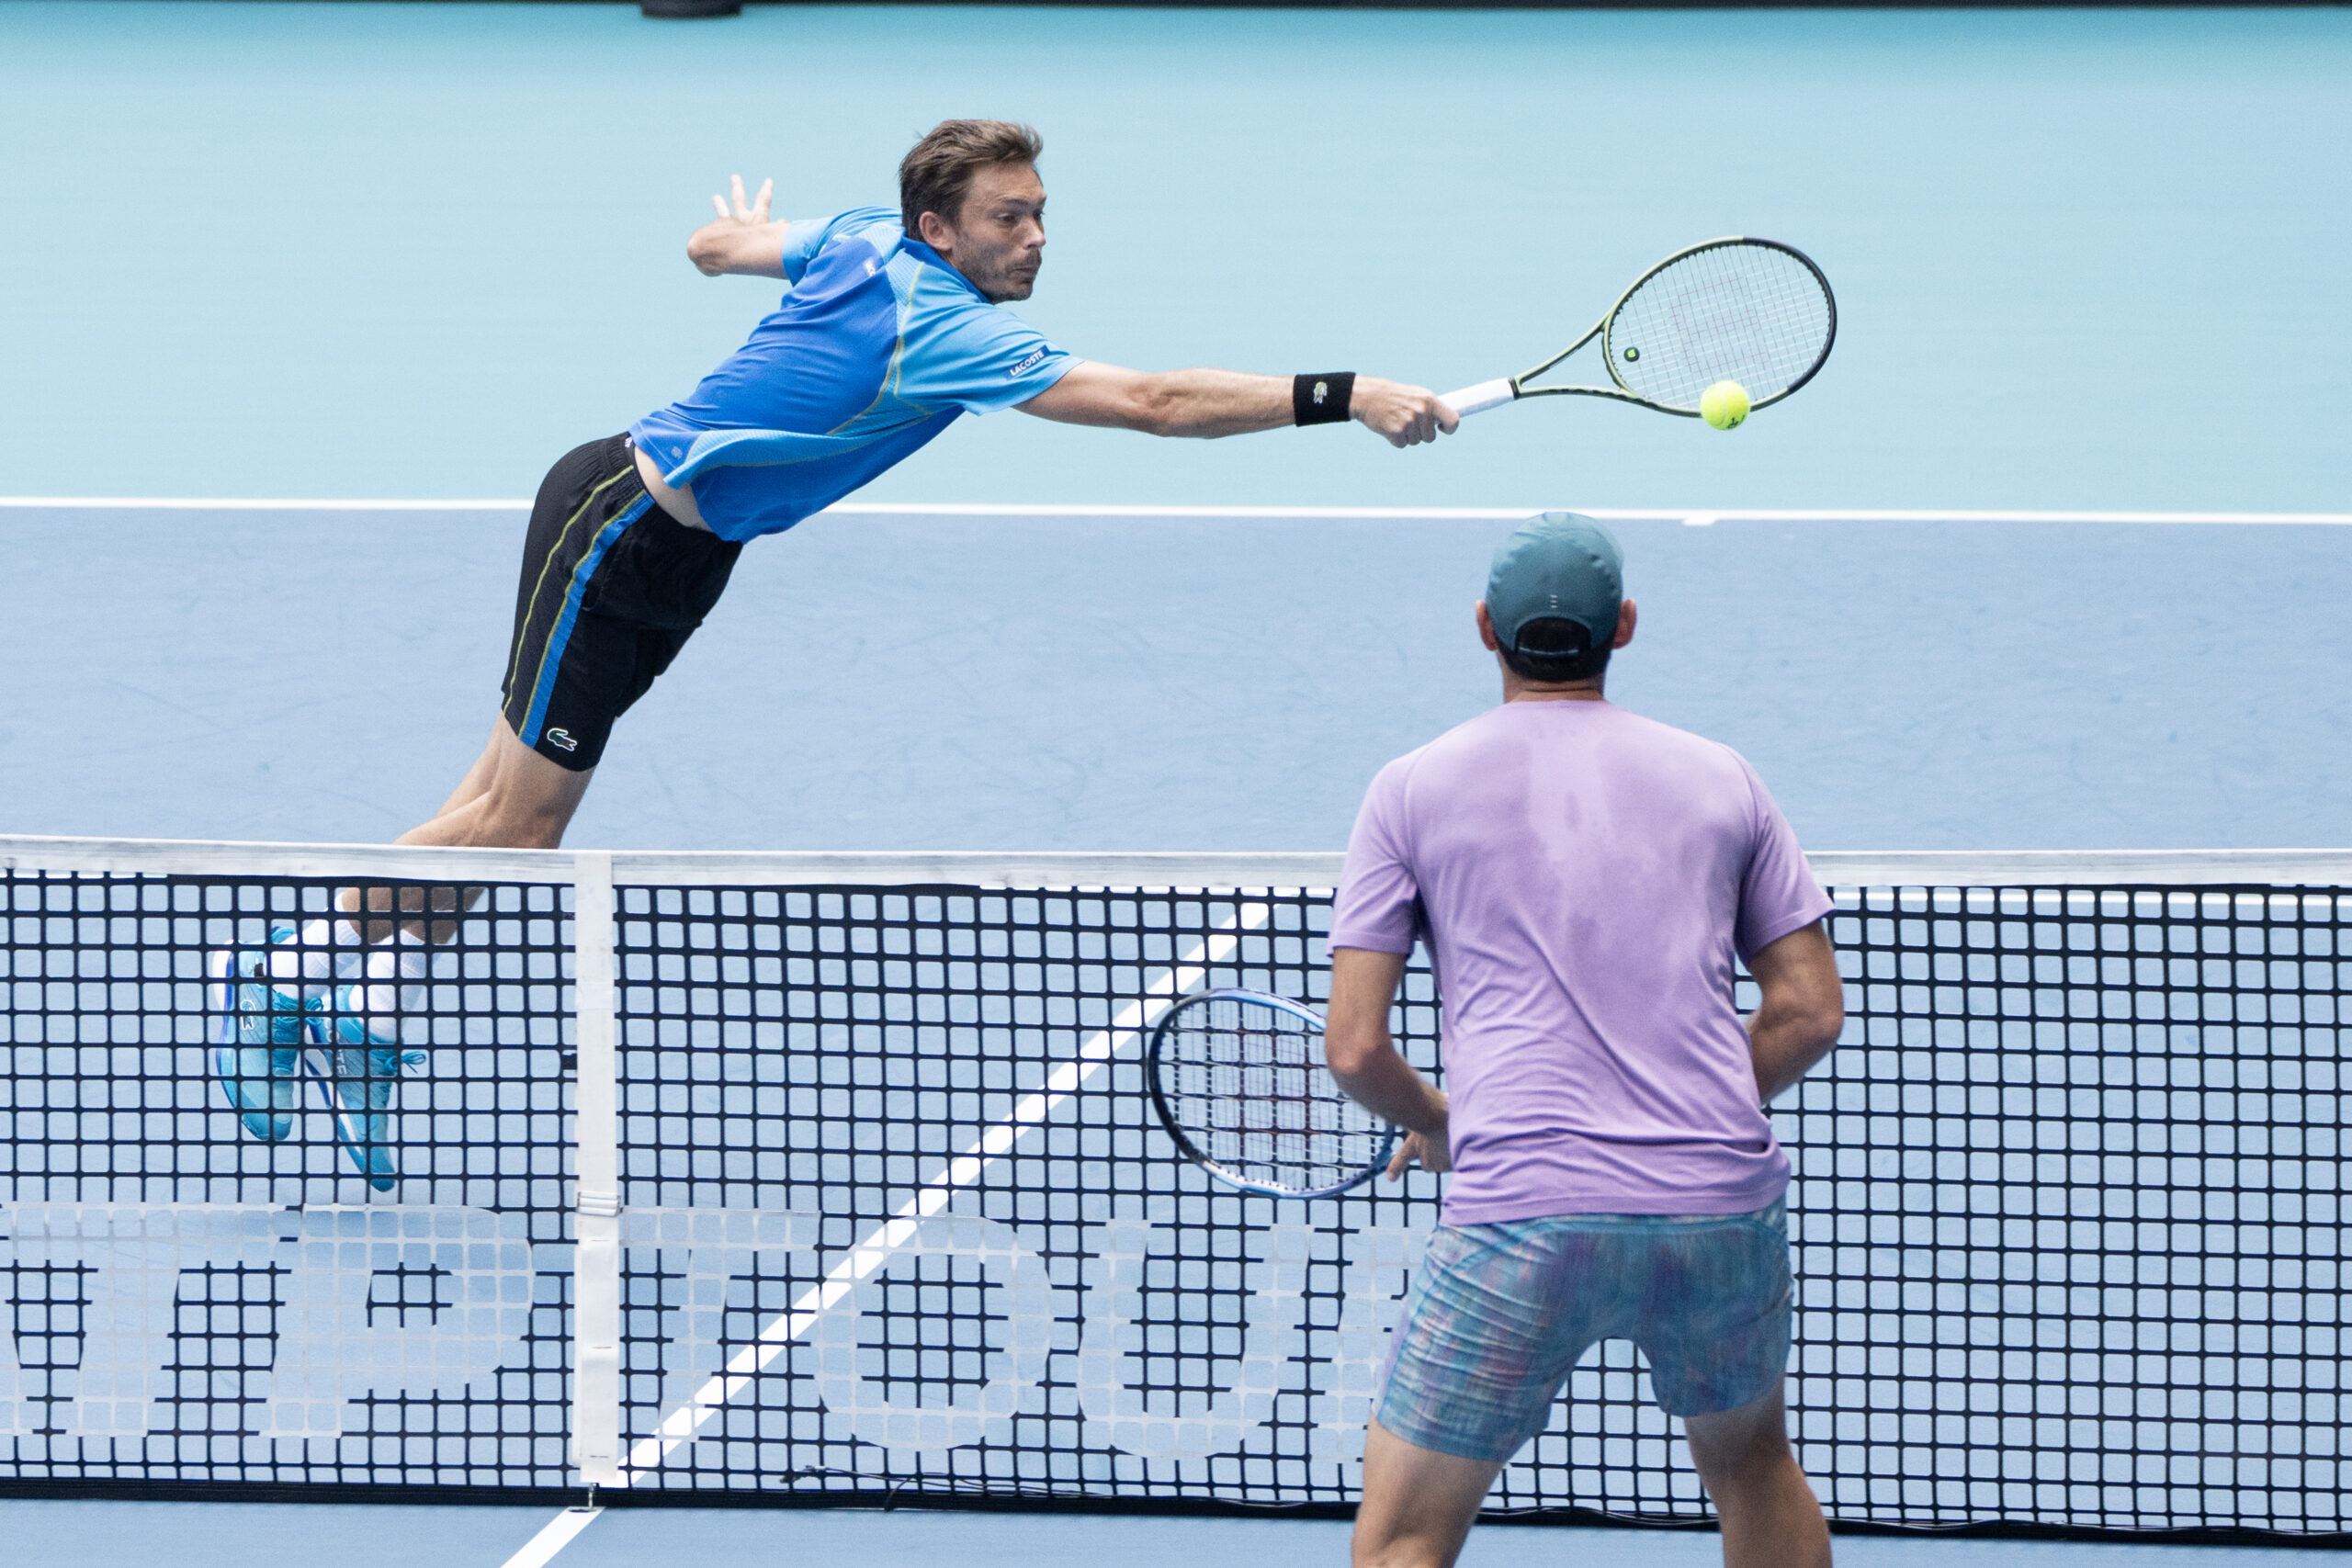 Nicolas Mahut stretches for a wide volley during the 2023 Miami Open Men's Doubles Final at Hard Rock Stadium in Miami Gardens, Florida on April 1st, 2023.